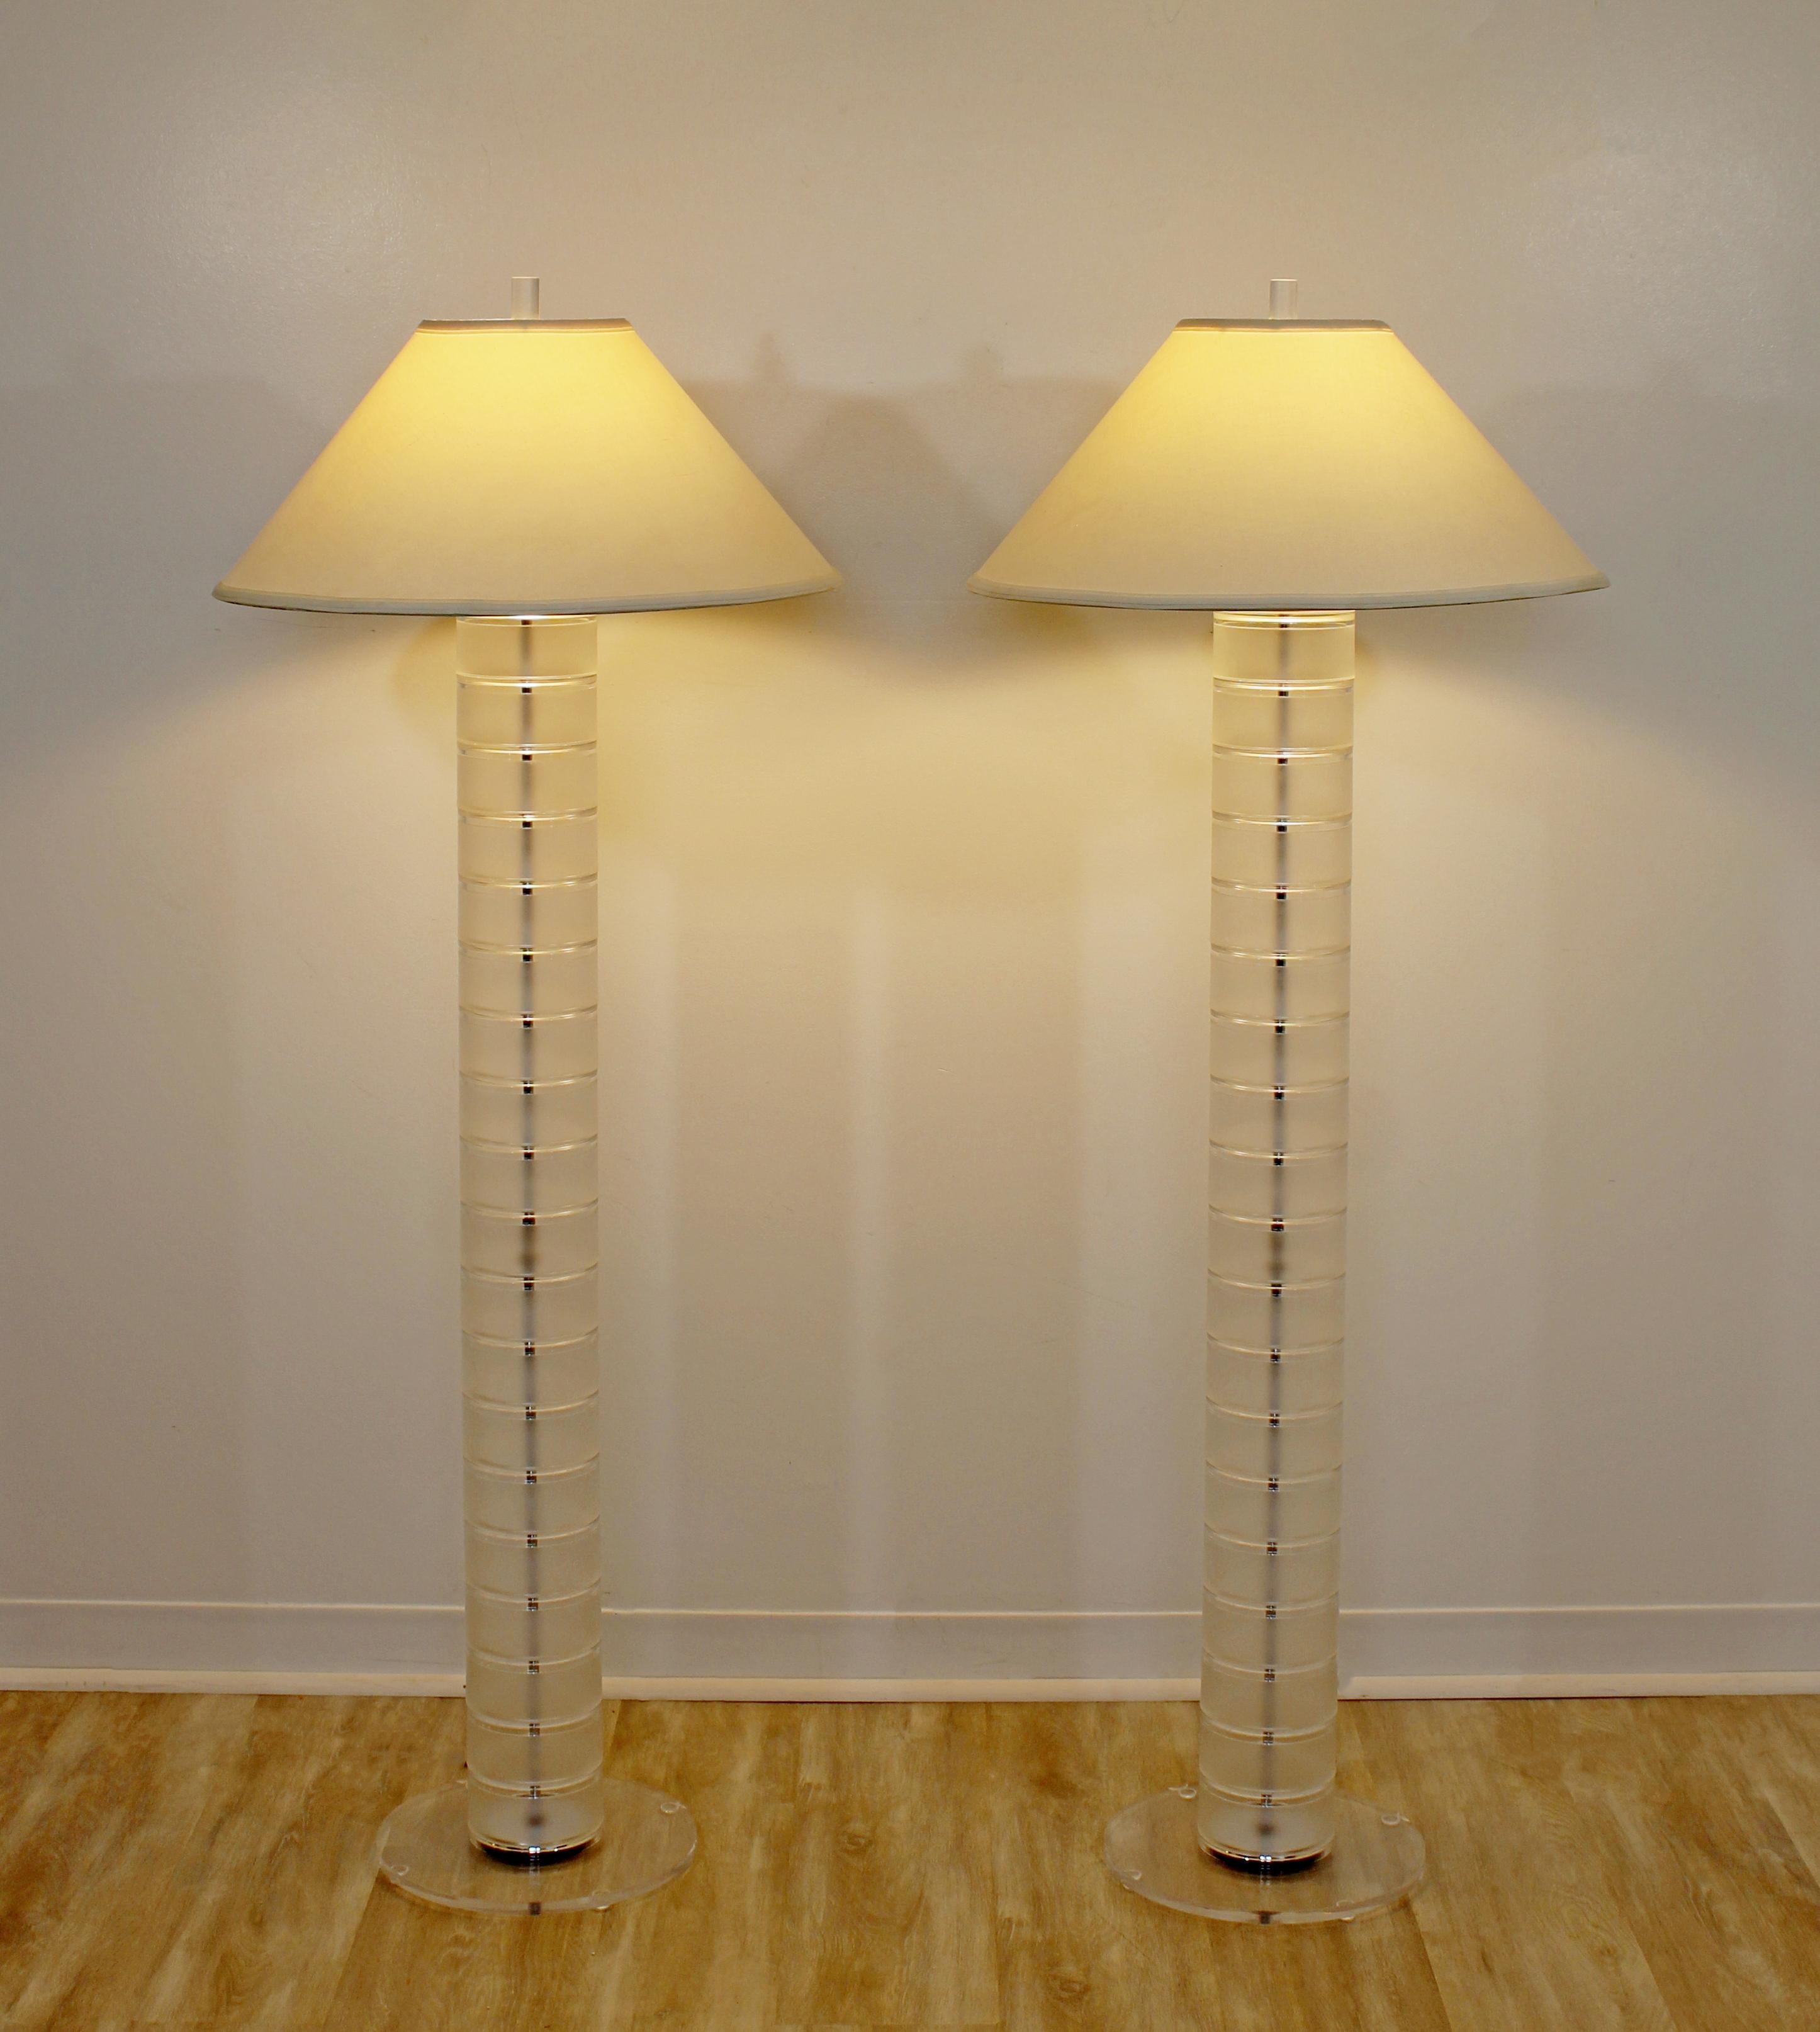 For your consideration is a gorgeous pair of floor lamps, made of acrylic and with Lucite bases and finials, by Optique, circa the 1980s. In very good vintage condition. The dimensions of the lamps are 12